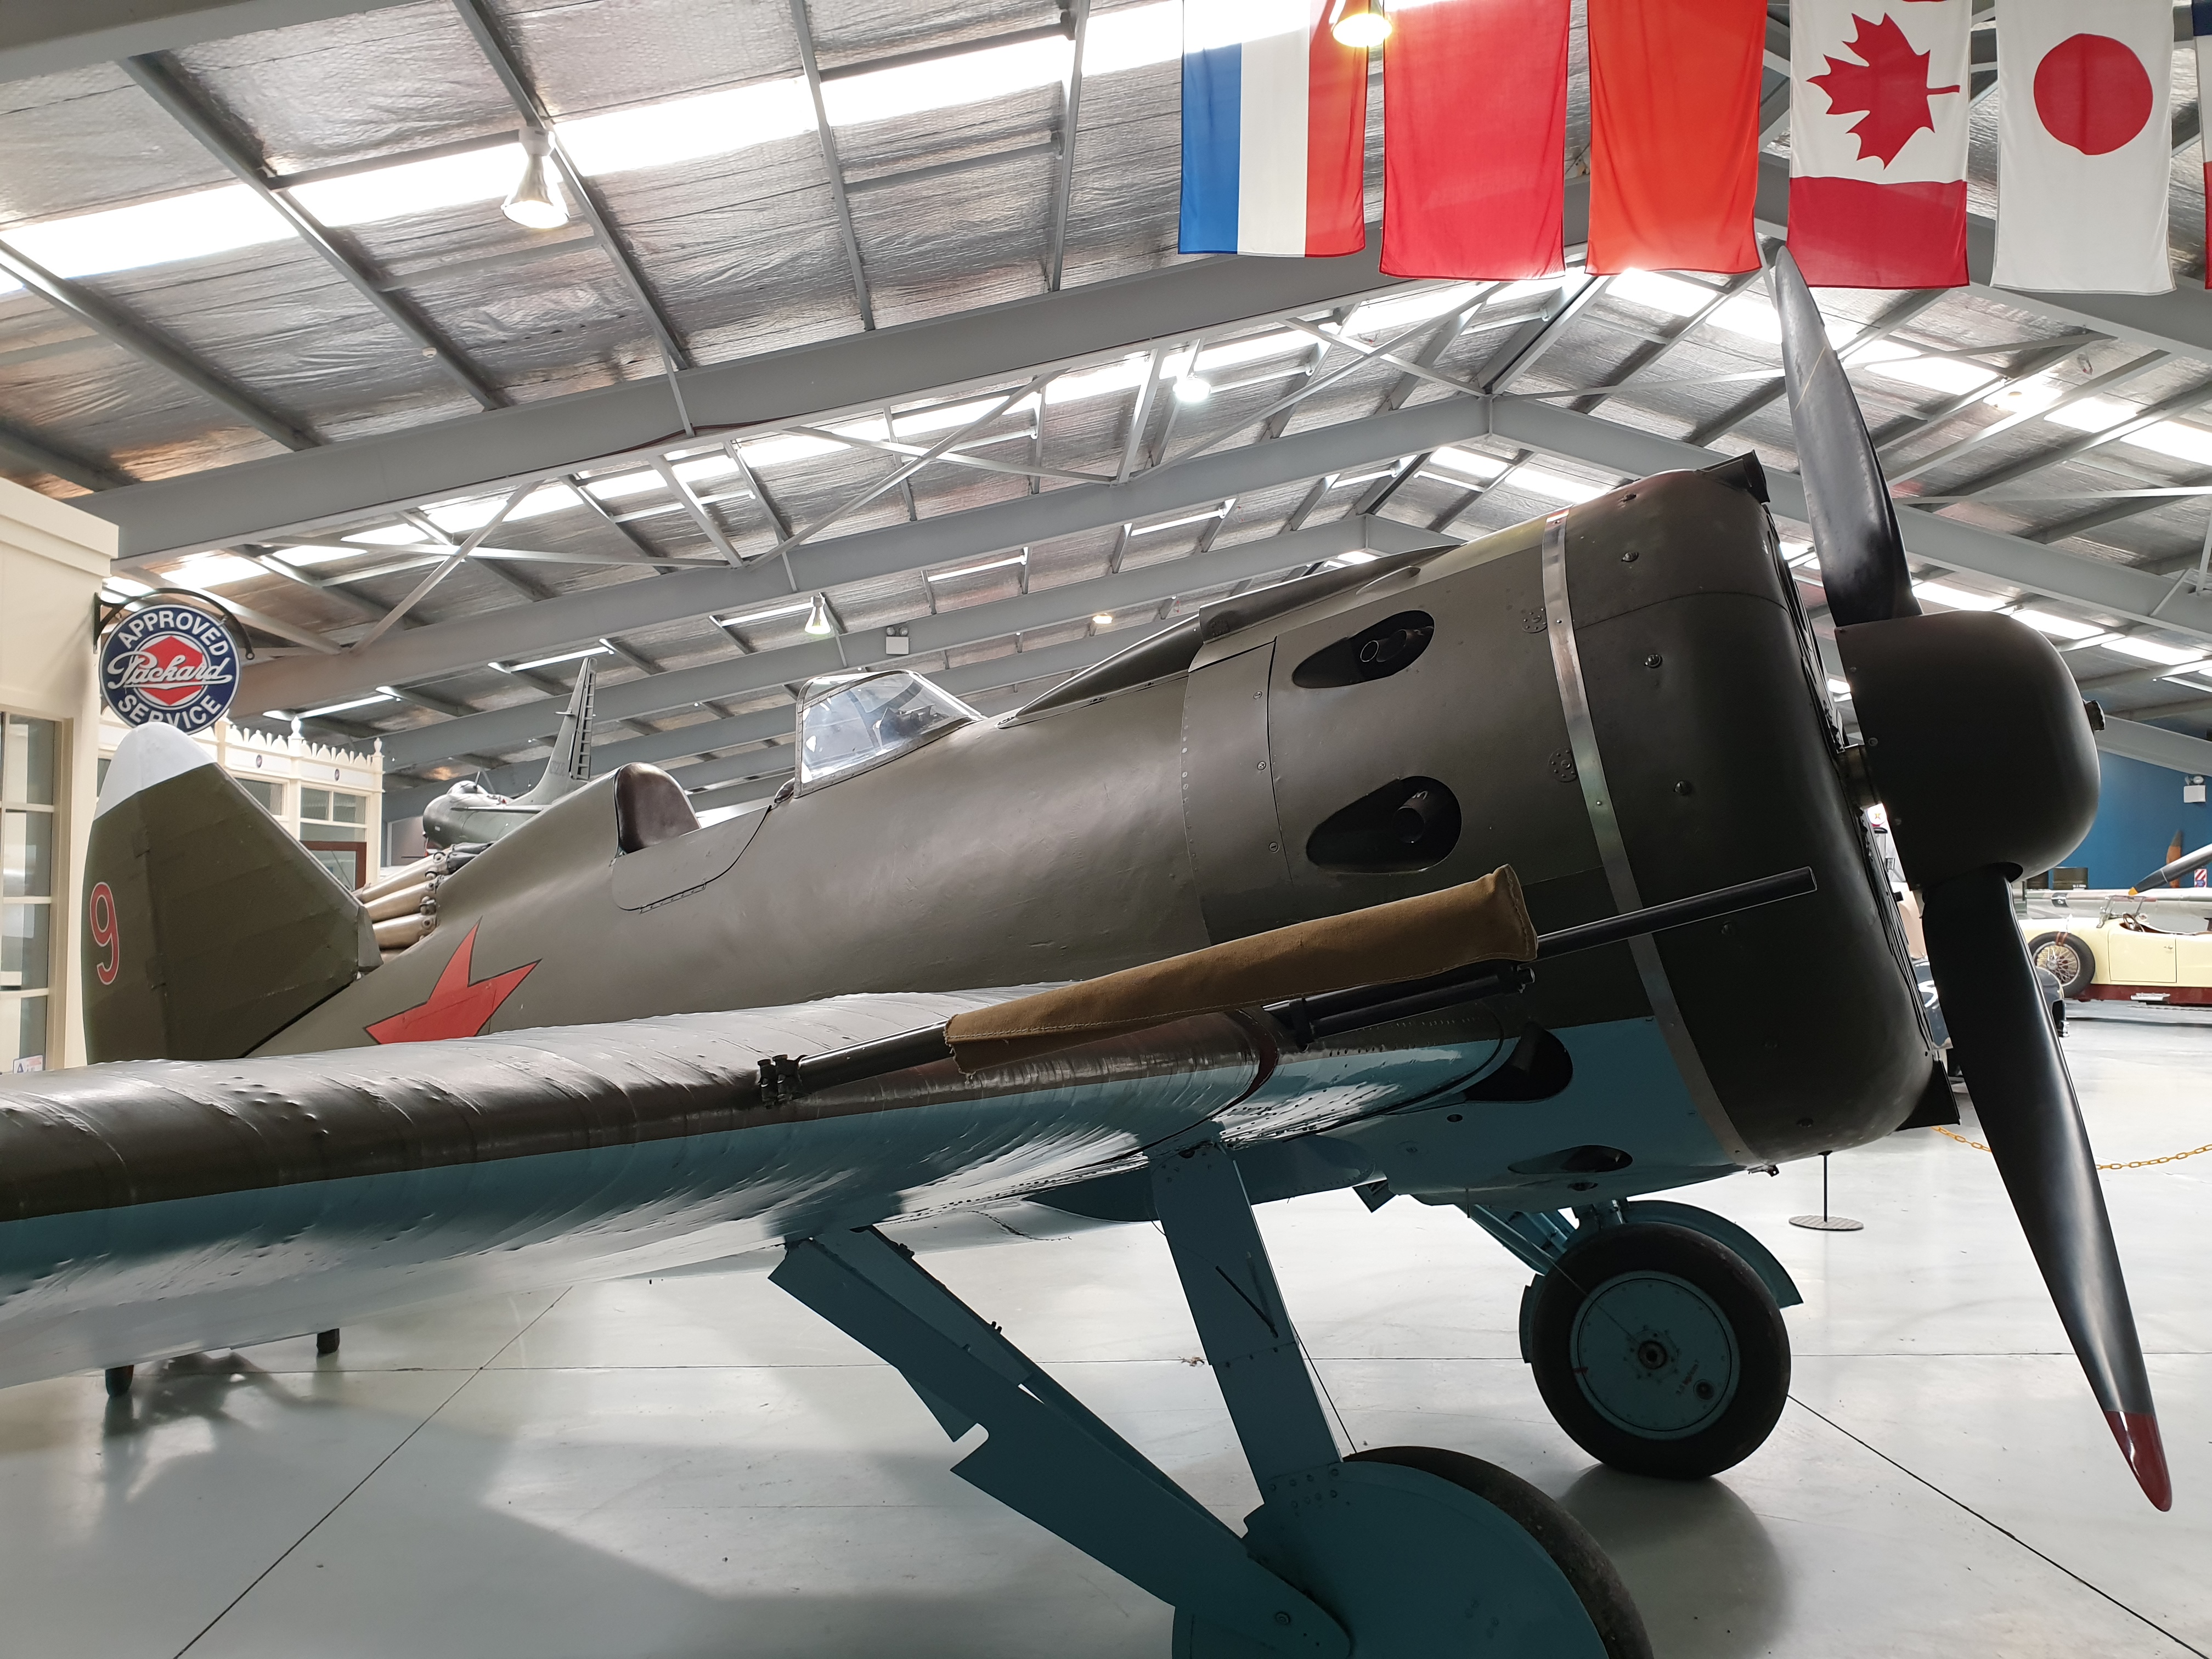 Arrangements are being made to ship this Polikarpov I-16 Russian fighter aircraft back to Germany...